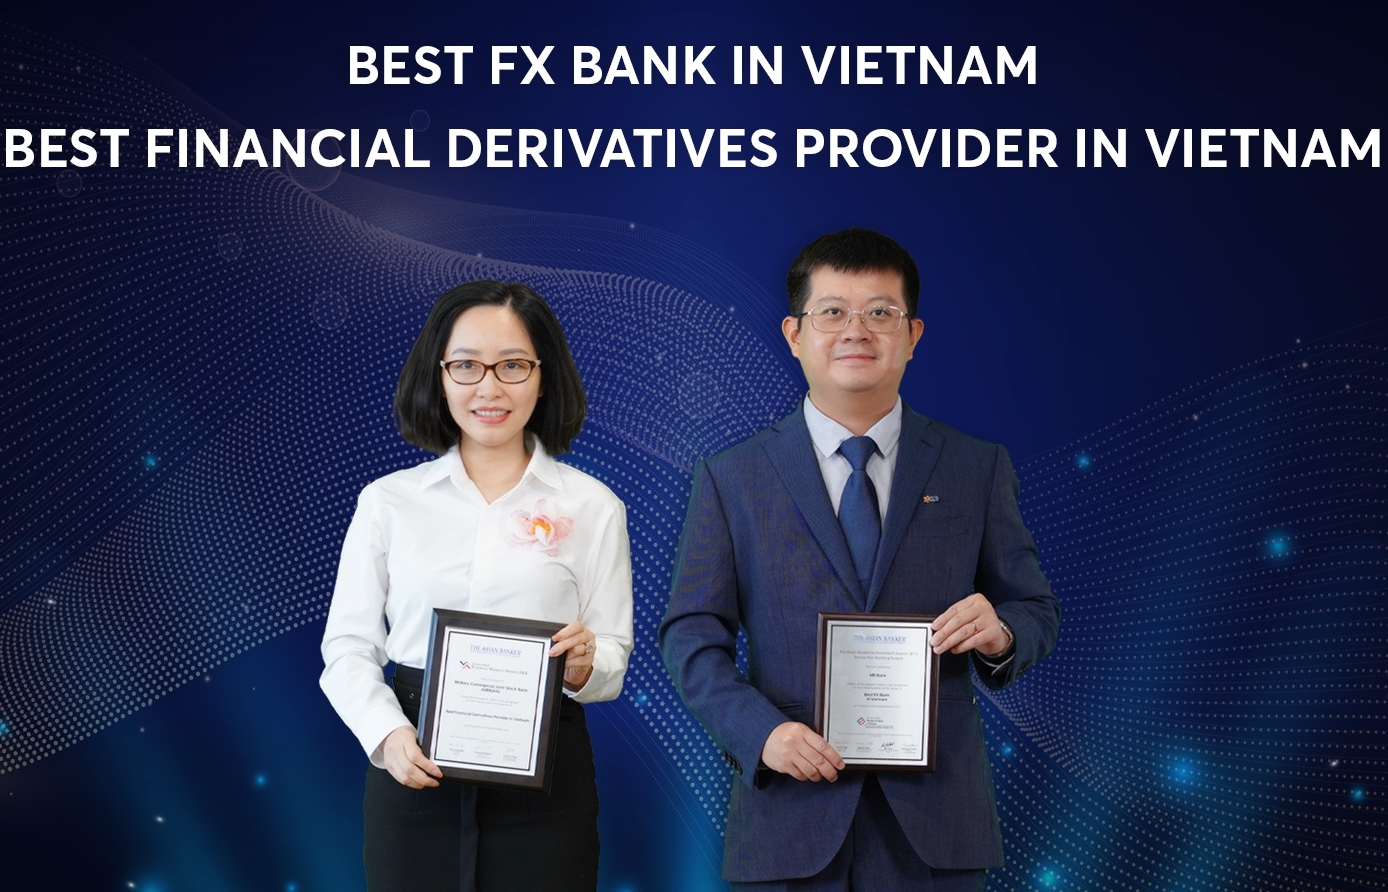 MB awarded titles of Best FX Bank and Best Financial Derivatives Provider in Vietnam